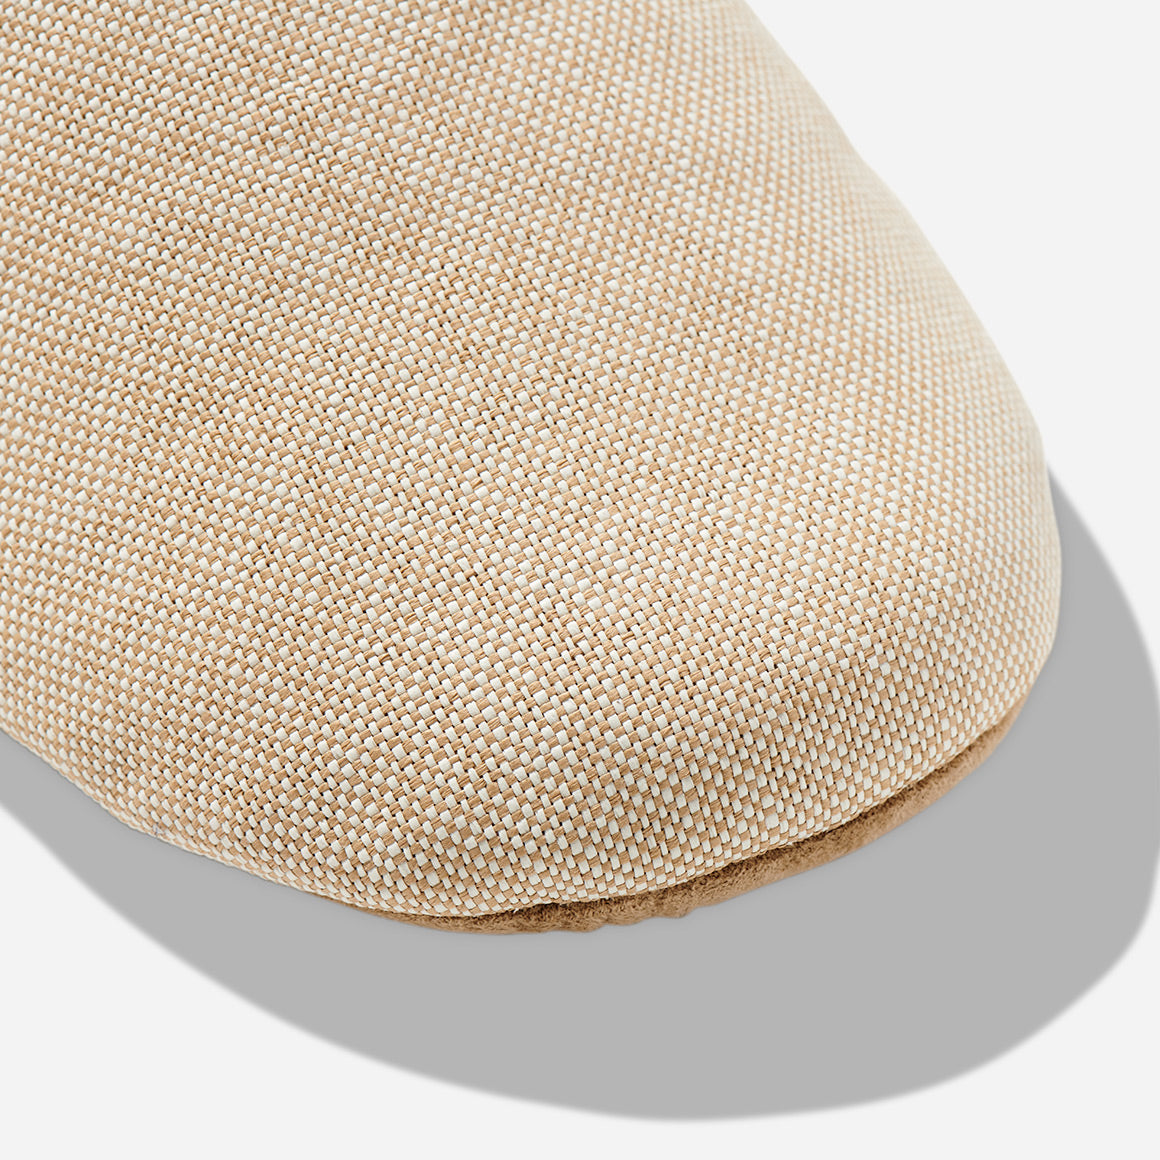 Up-close image of the toe box of a beige color room slipper.